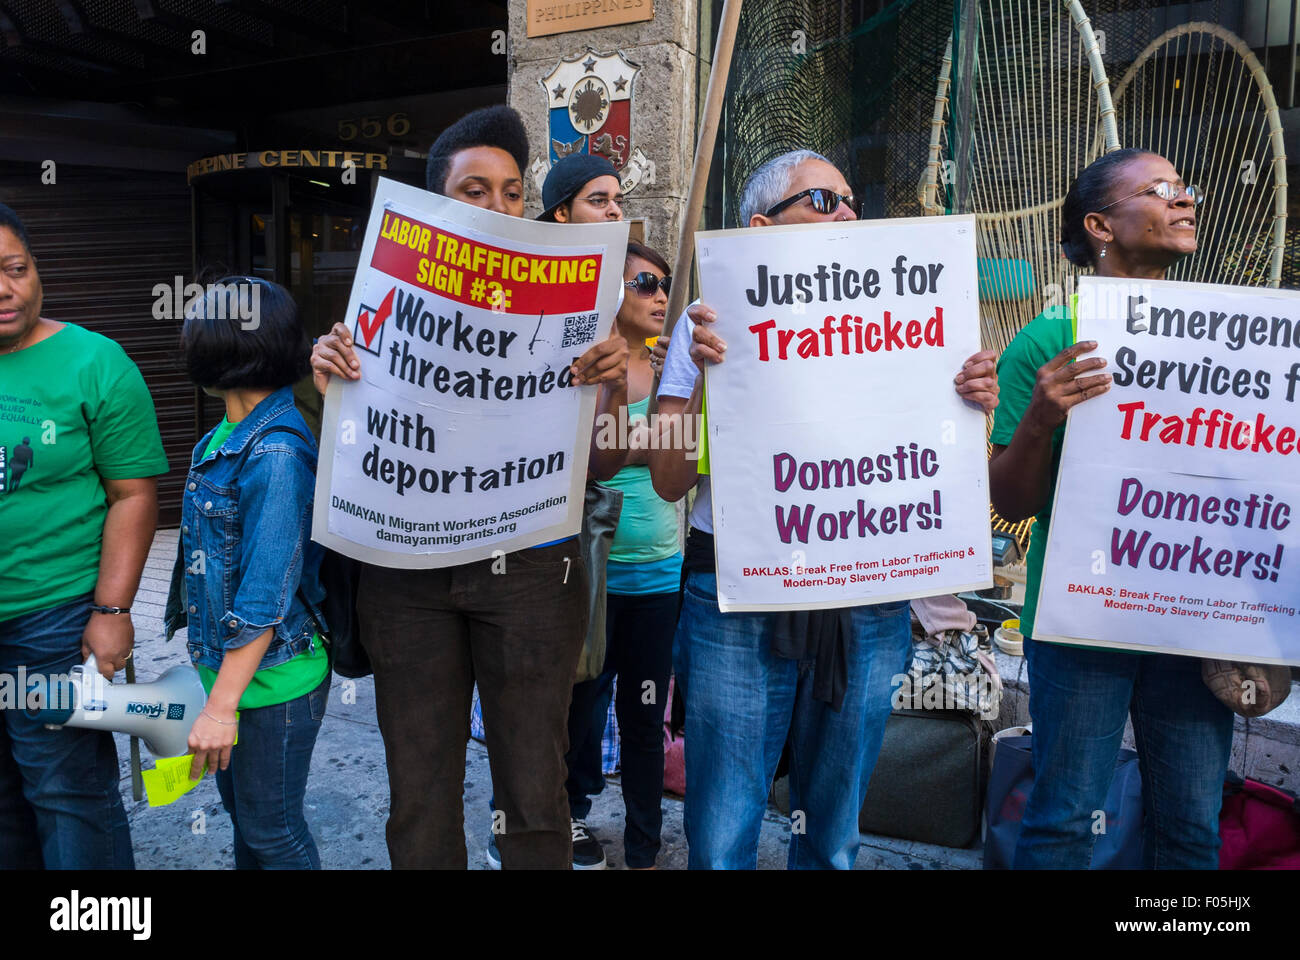 New York City, USA, Woman Holding Protest Signs, Labor Slavery Demonstration, Migrants, Filipino Domestic Workers protesters, International Immigrants rights, social justice slogans, Human Trafficking, immigrant labor, workers rights protests, peaceful protest sign Stock Photo